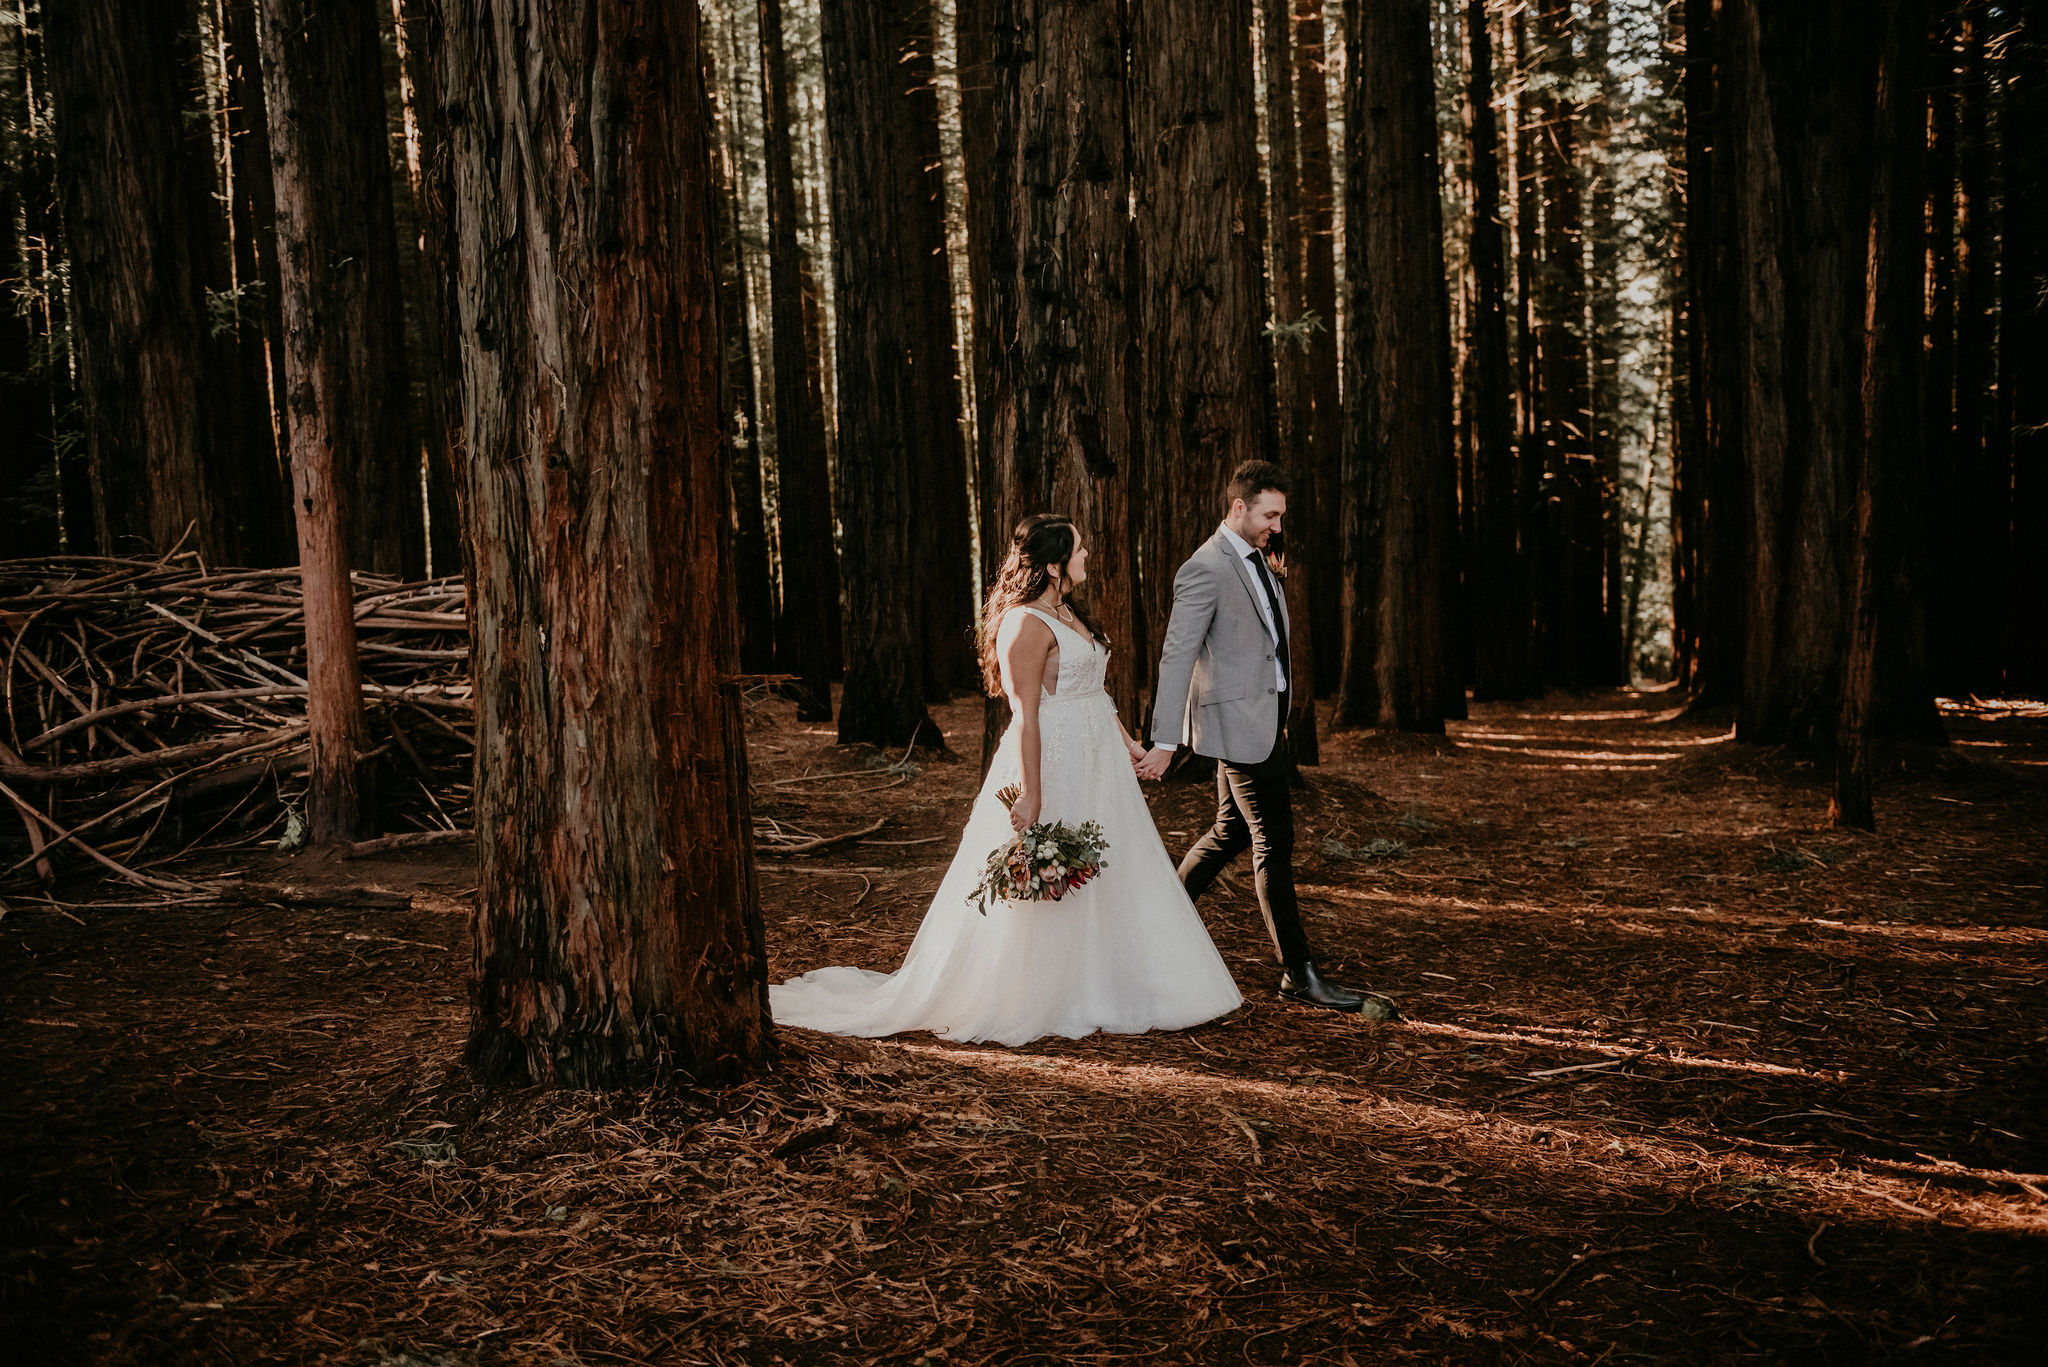 Lets-Elope-Melbourne-Celebrant-Photographer-Elopement-Package-Victoria-Sarah-Matler-Photography-Videography-Video-Warburton-Redwood-Forest-weddings-intimate-18